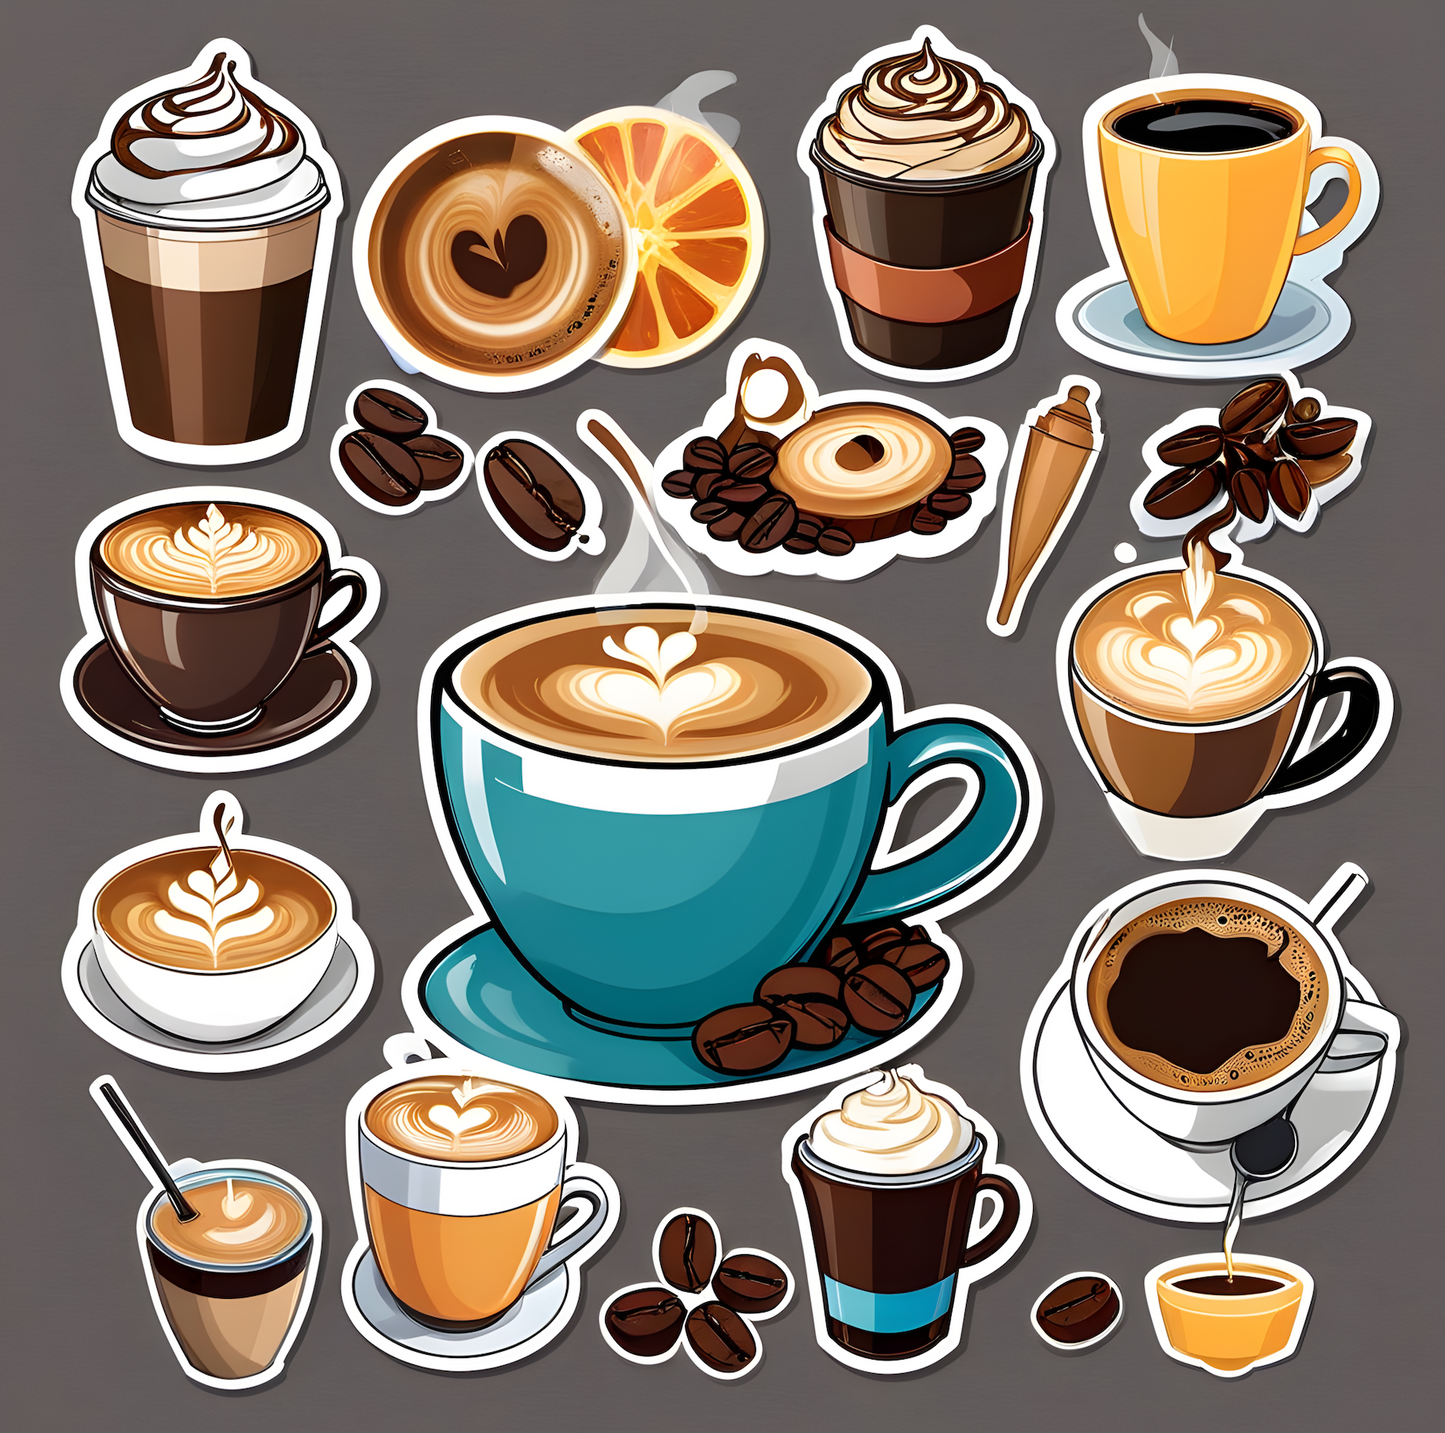 Sheet of 19 Printable Coffee Lover Stickers - Version 2